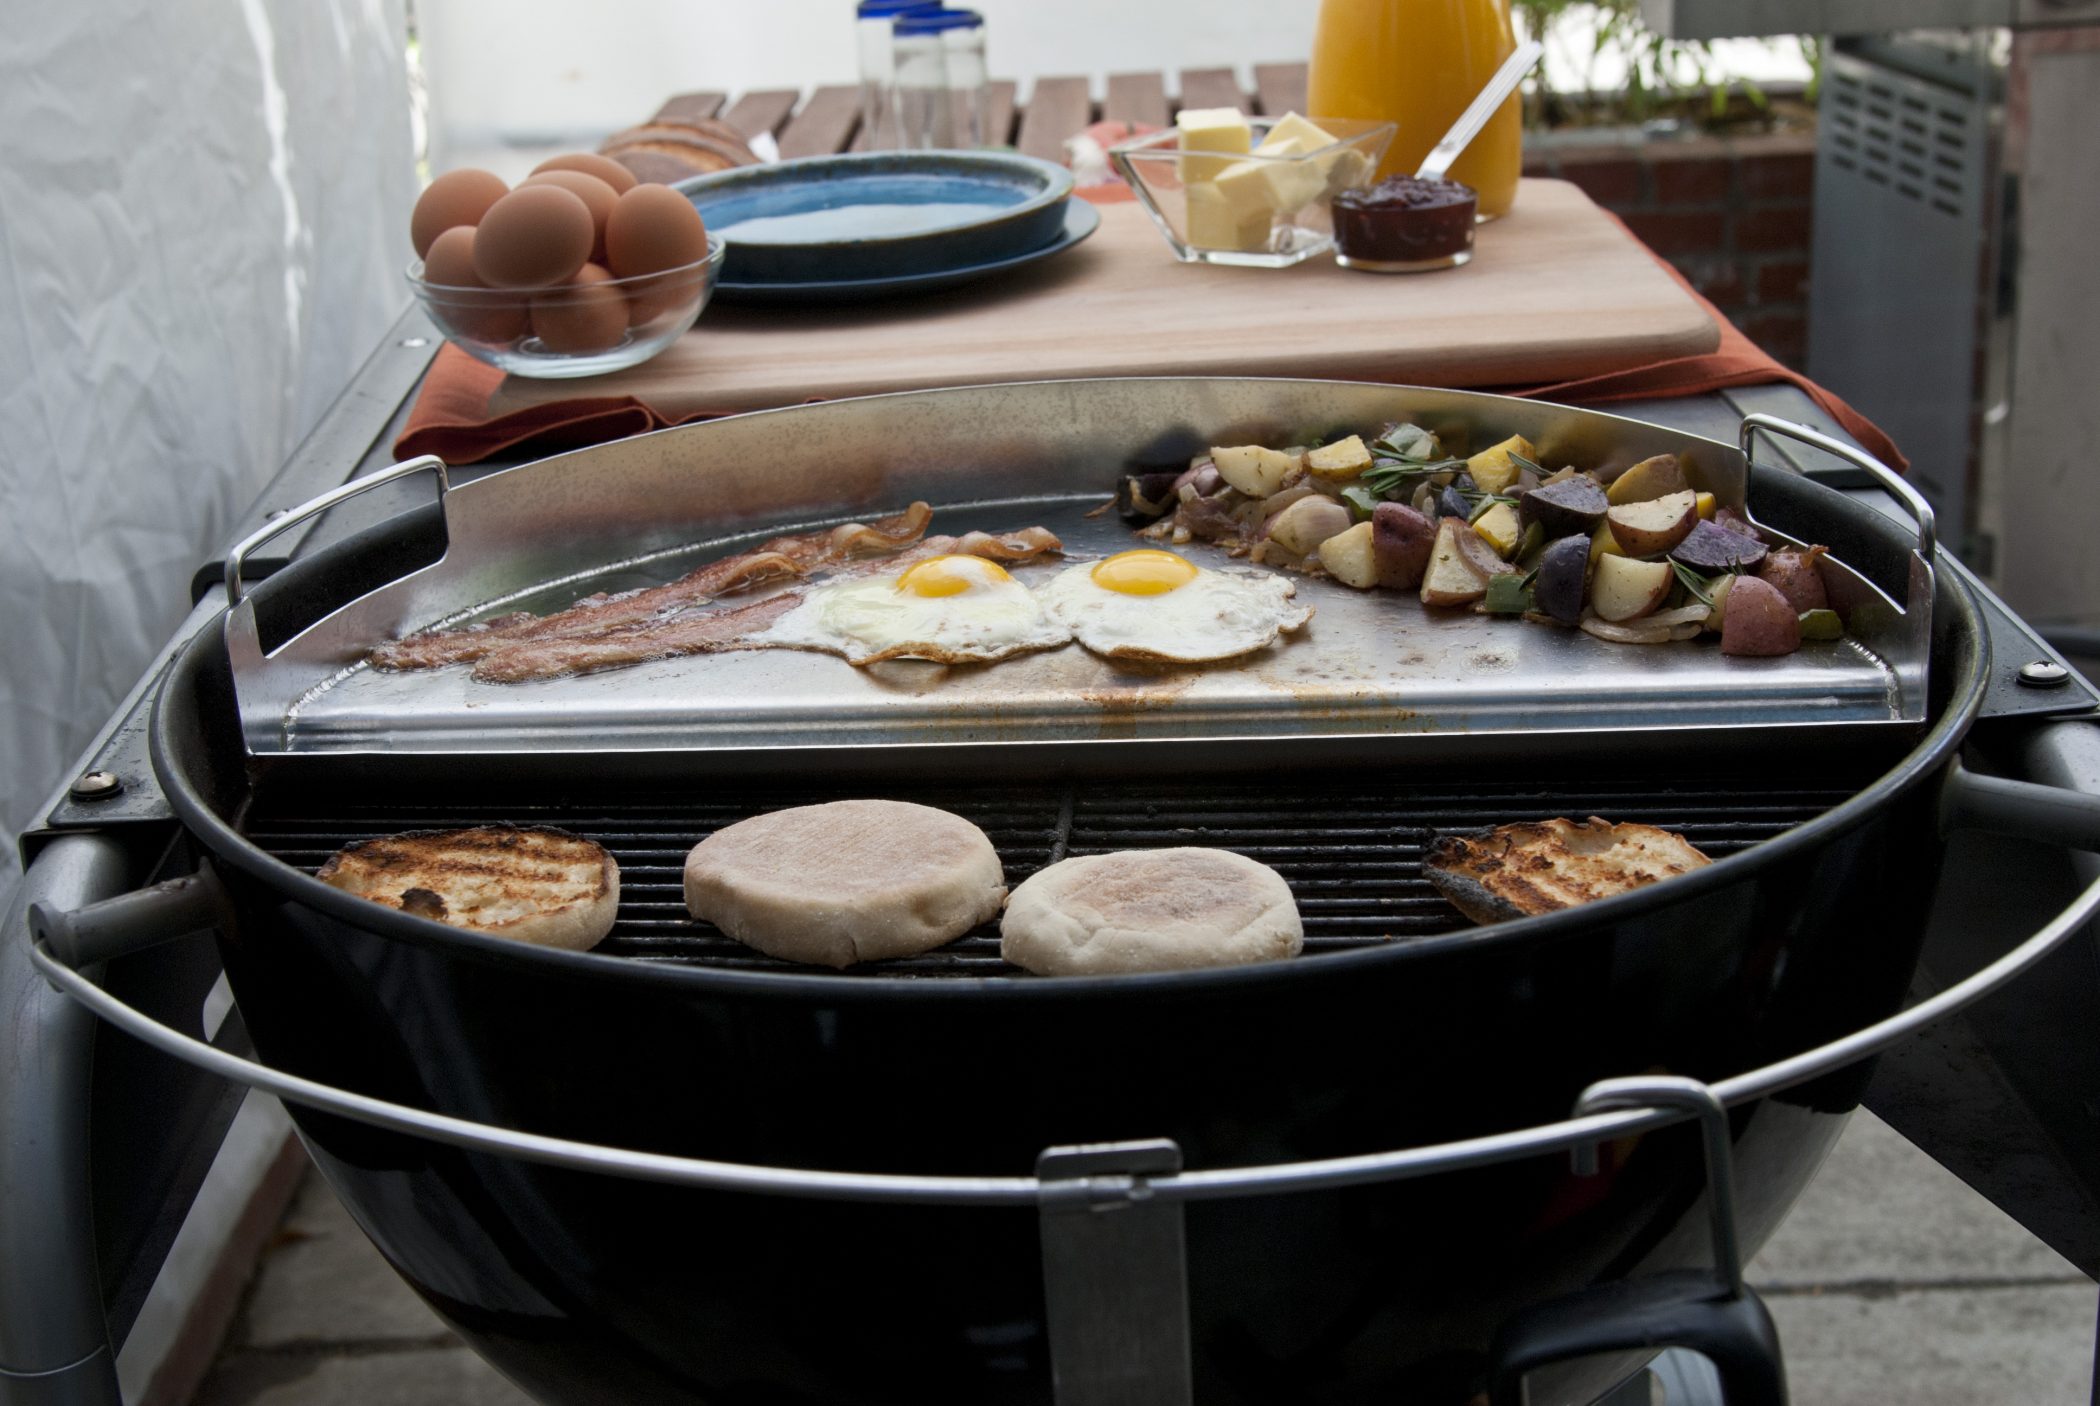 Tips and Tricks to Cook the Best Breakfast on the Grill Without